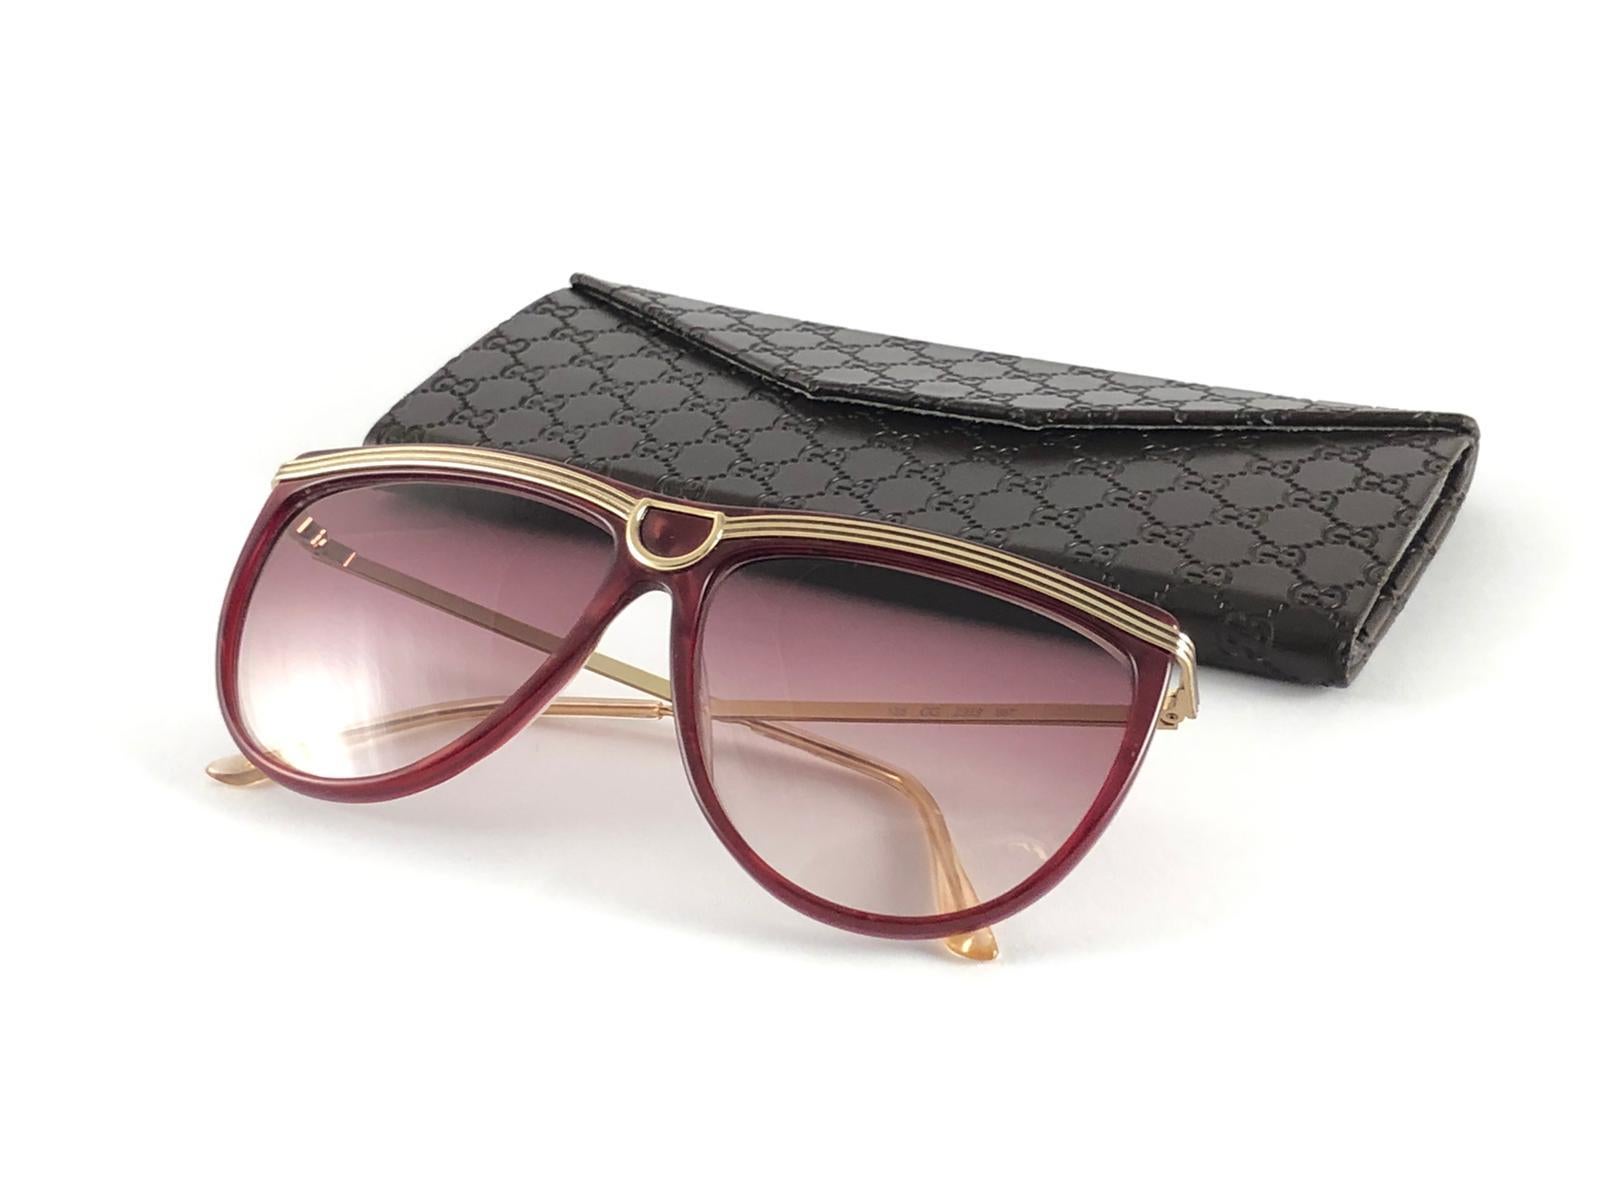 New Vintage Gucci 2303 Burgundy & Gold Accents Sunglasses 1980's Made in Italy 4